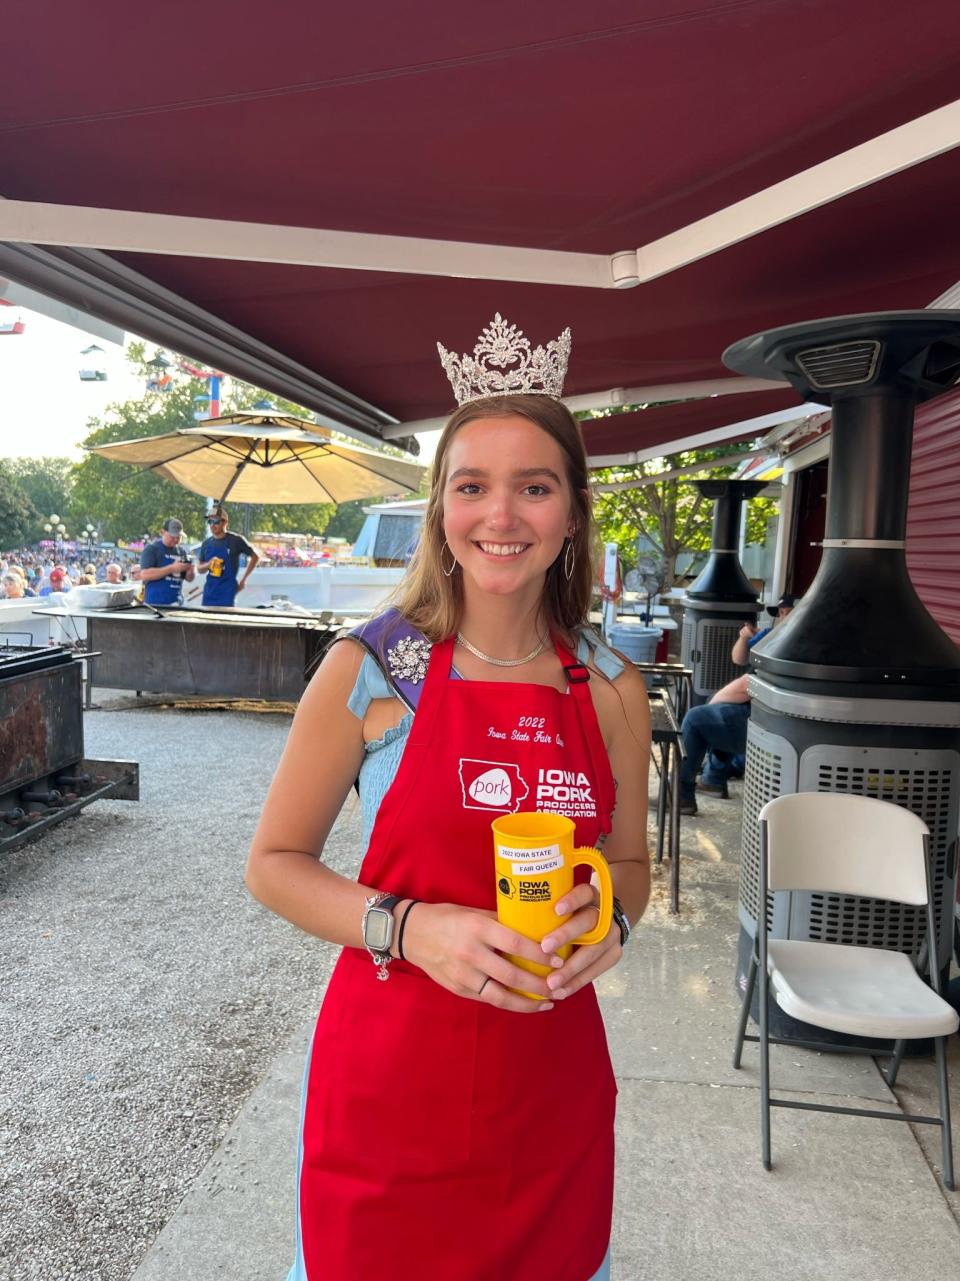 Mary Ann Fox, who served as the Iowa State Fair queen for 2022, went to 76 county fairs this summer.